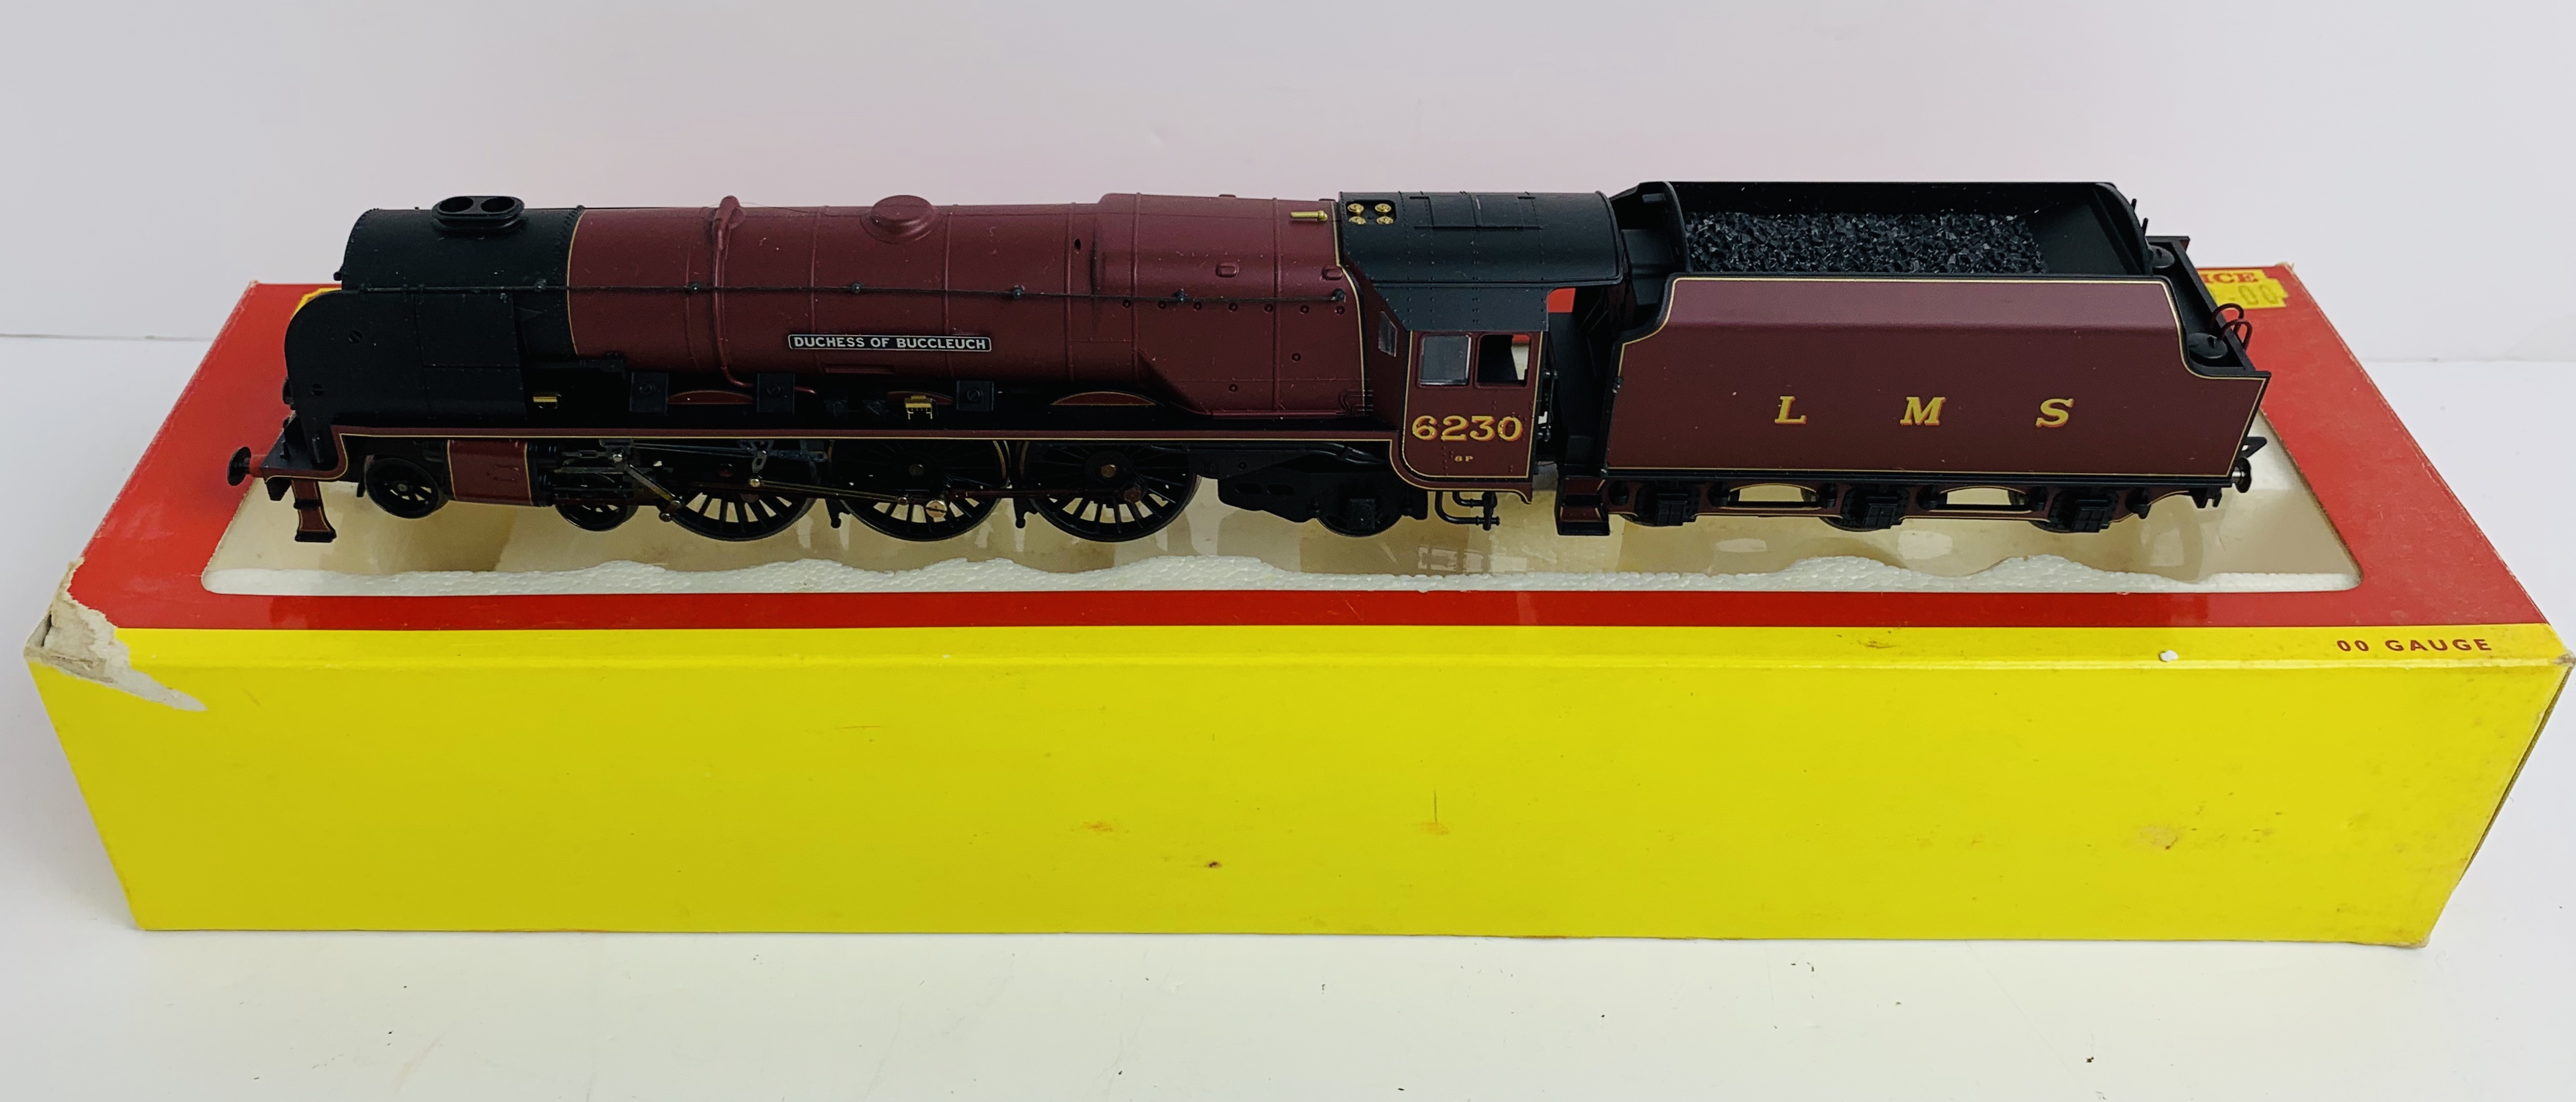 Hornby Duchess of Buccleuch 6230 Loco. P&P Group 2 (£18+VAT for the first lot and £3+VAT for